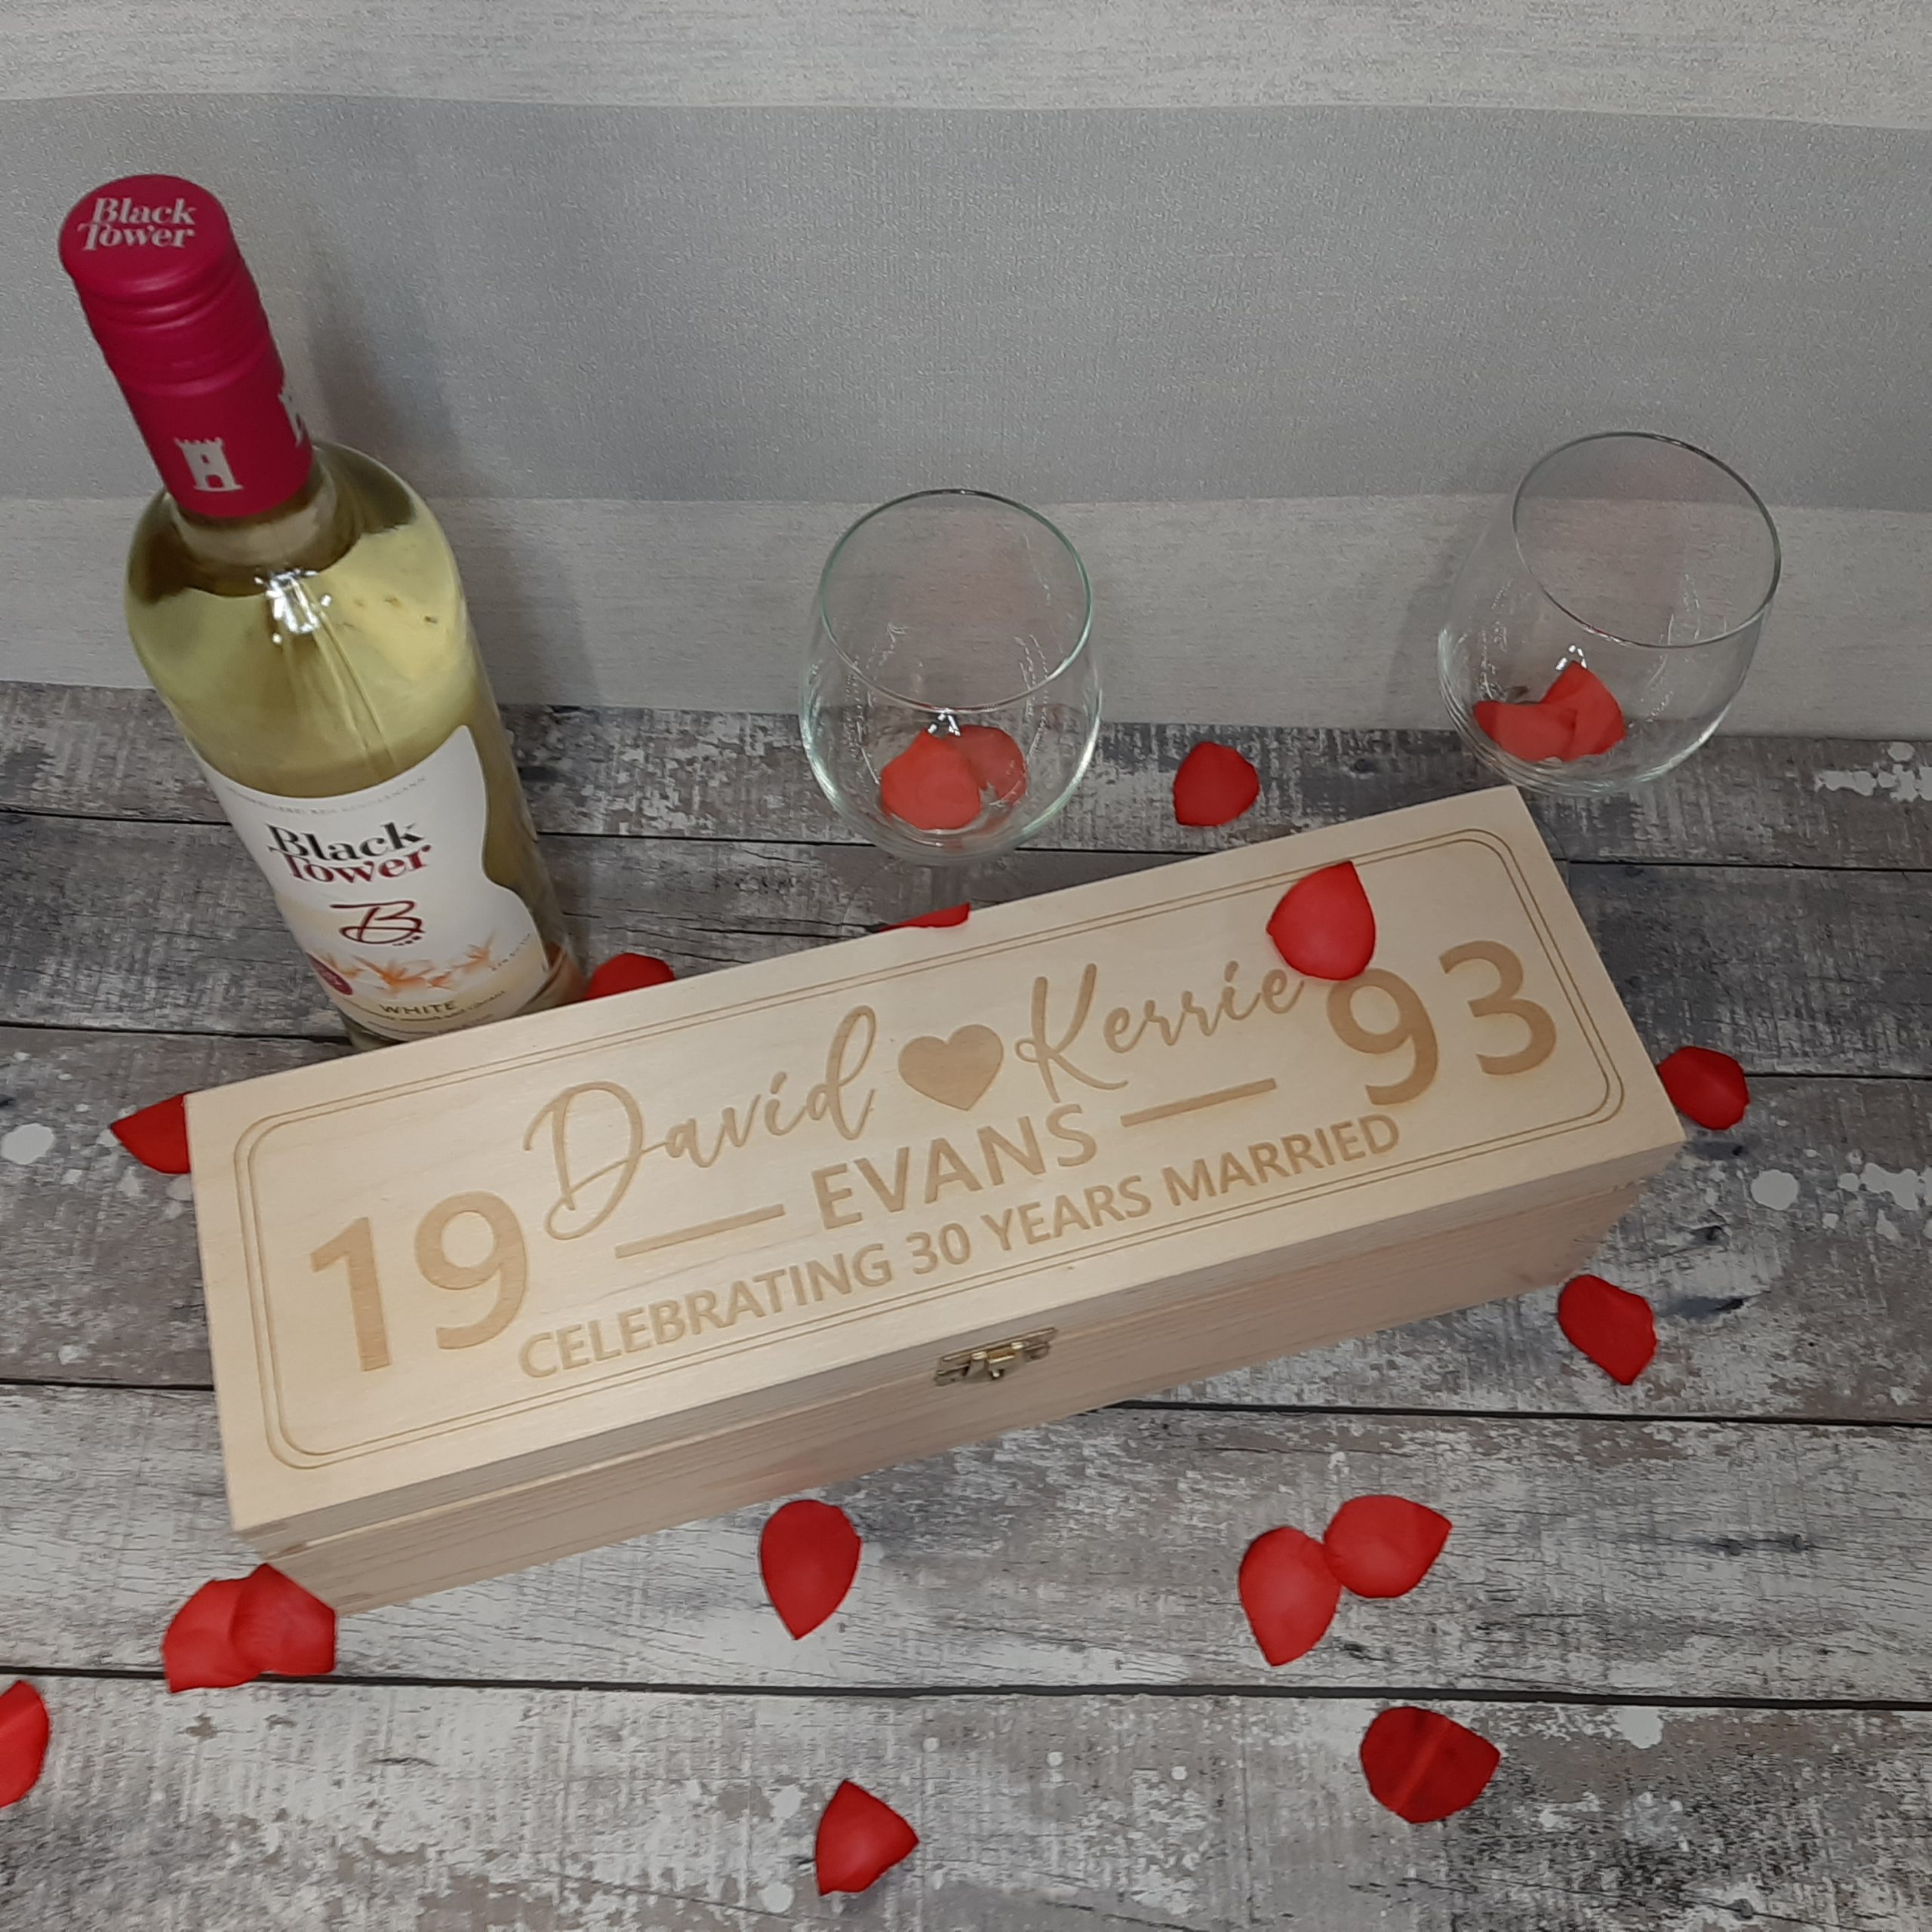 Wooden Wine Gift Box set up with wine bottle and glasses for romantic evening